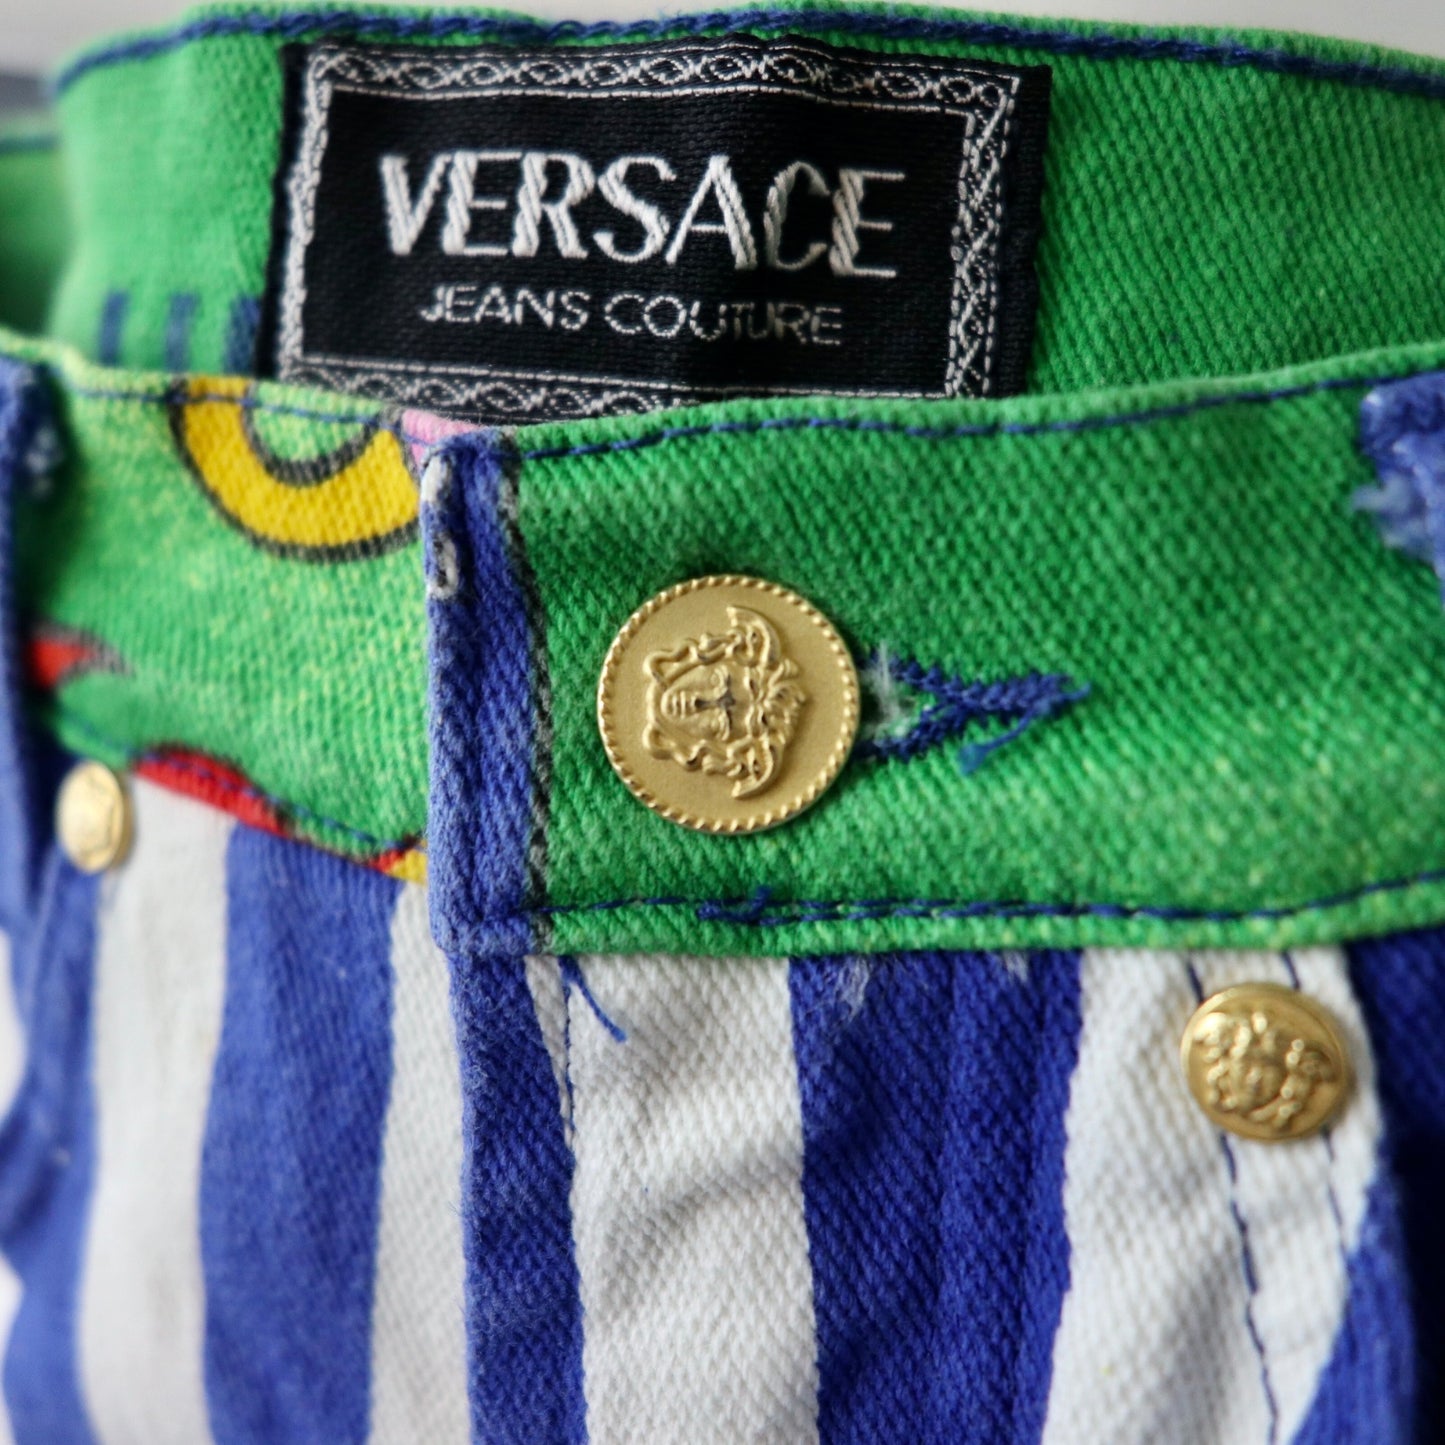 VERSACE JEANS COUTURE クレイジーパターンパンツ 26 ストライプ 総柄